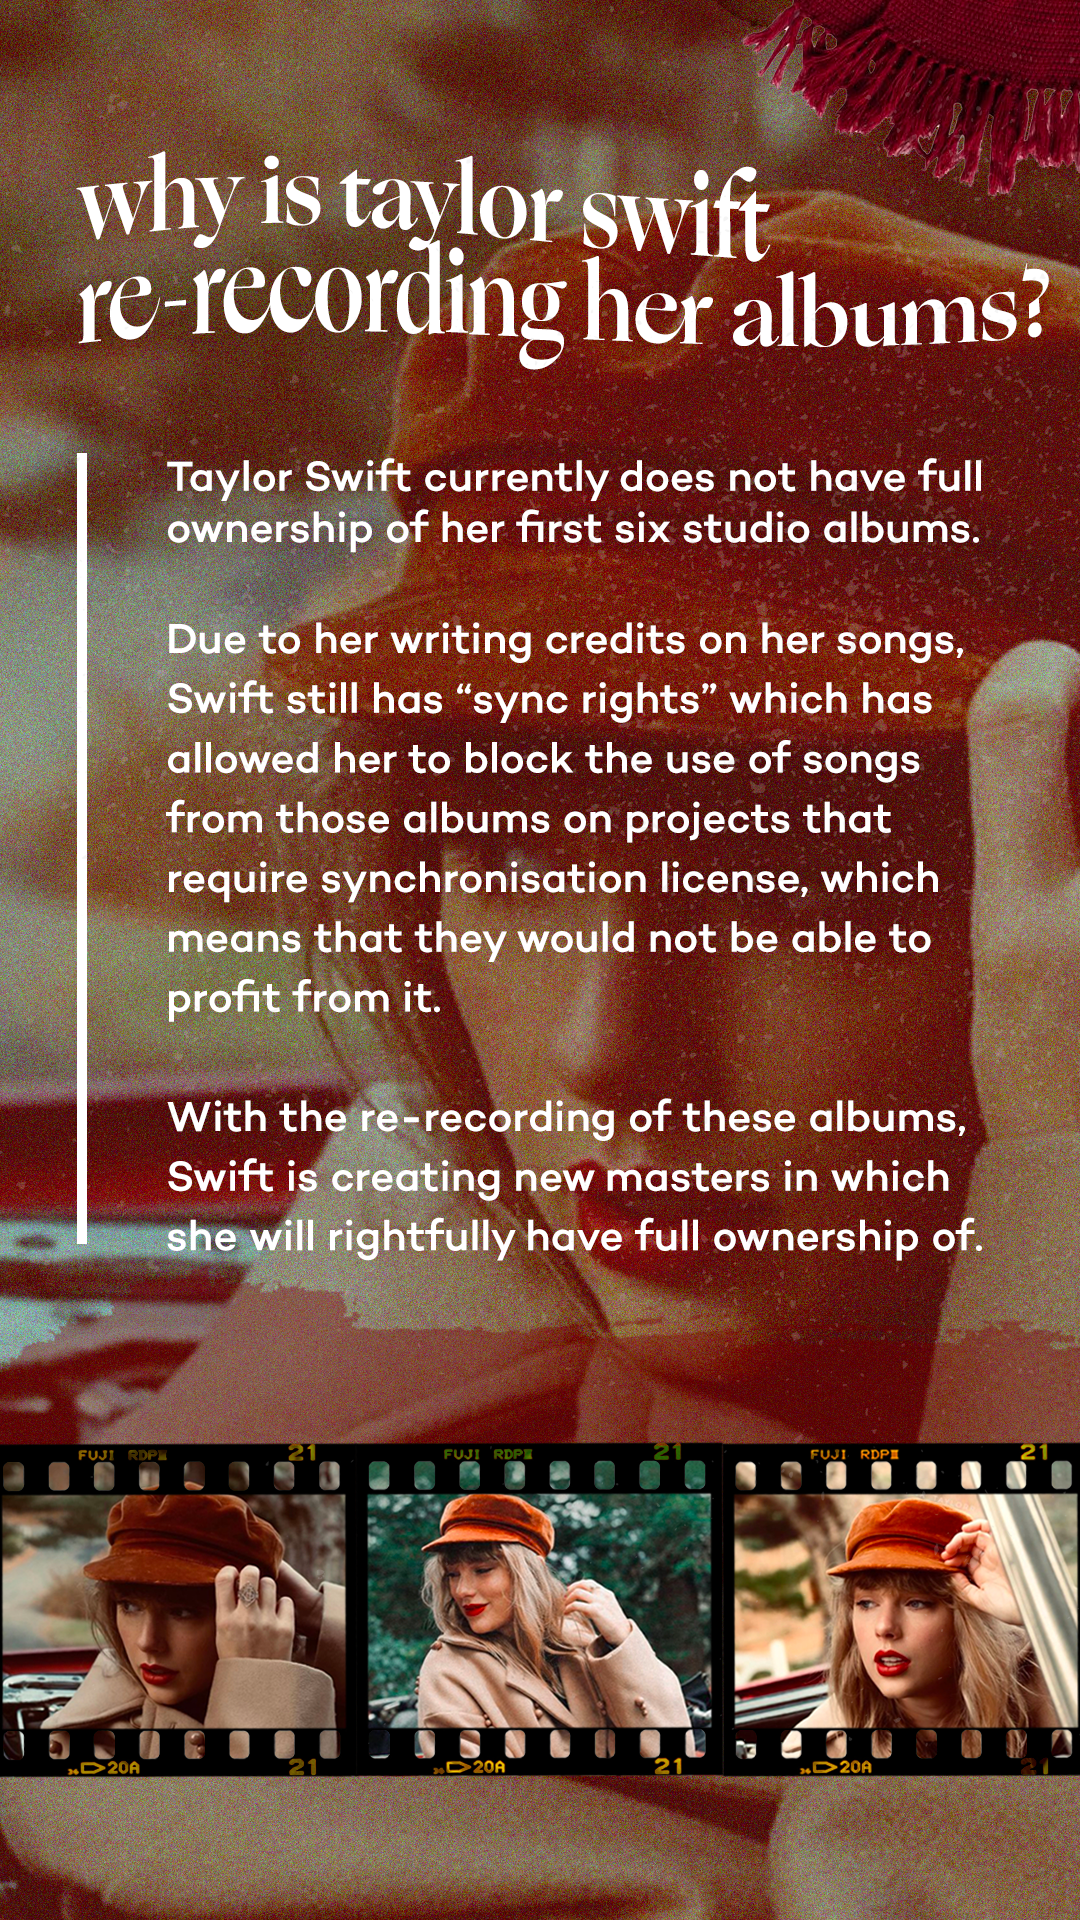 taylor-swift-why-re-recording-albums-red-taylor's-version